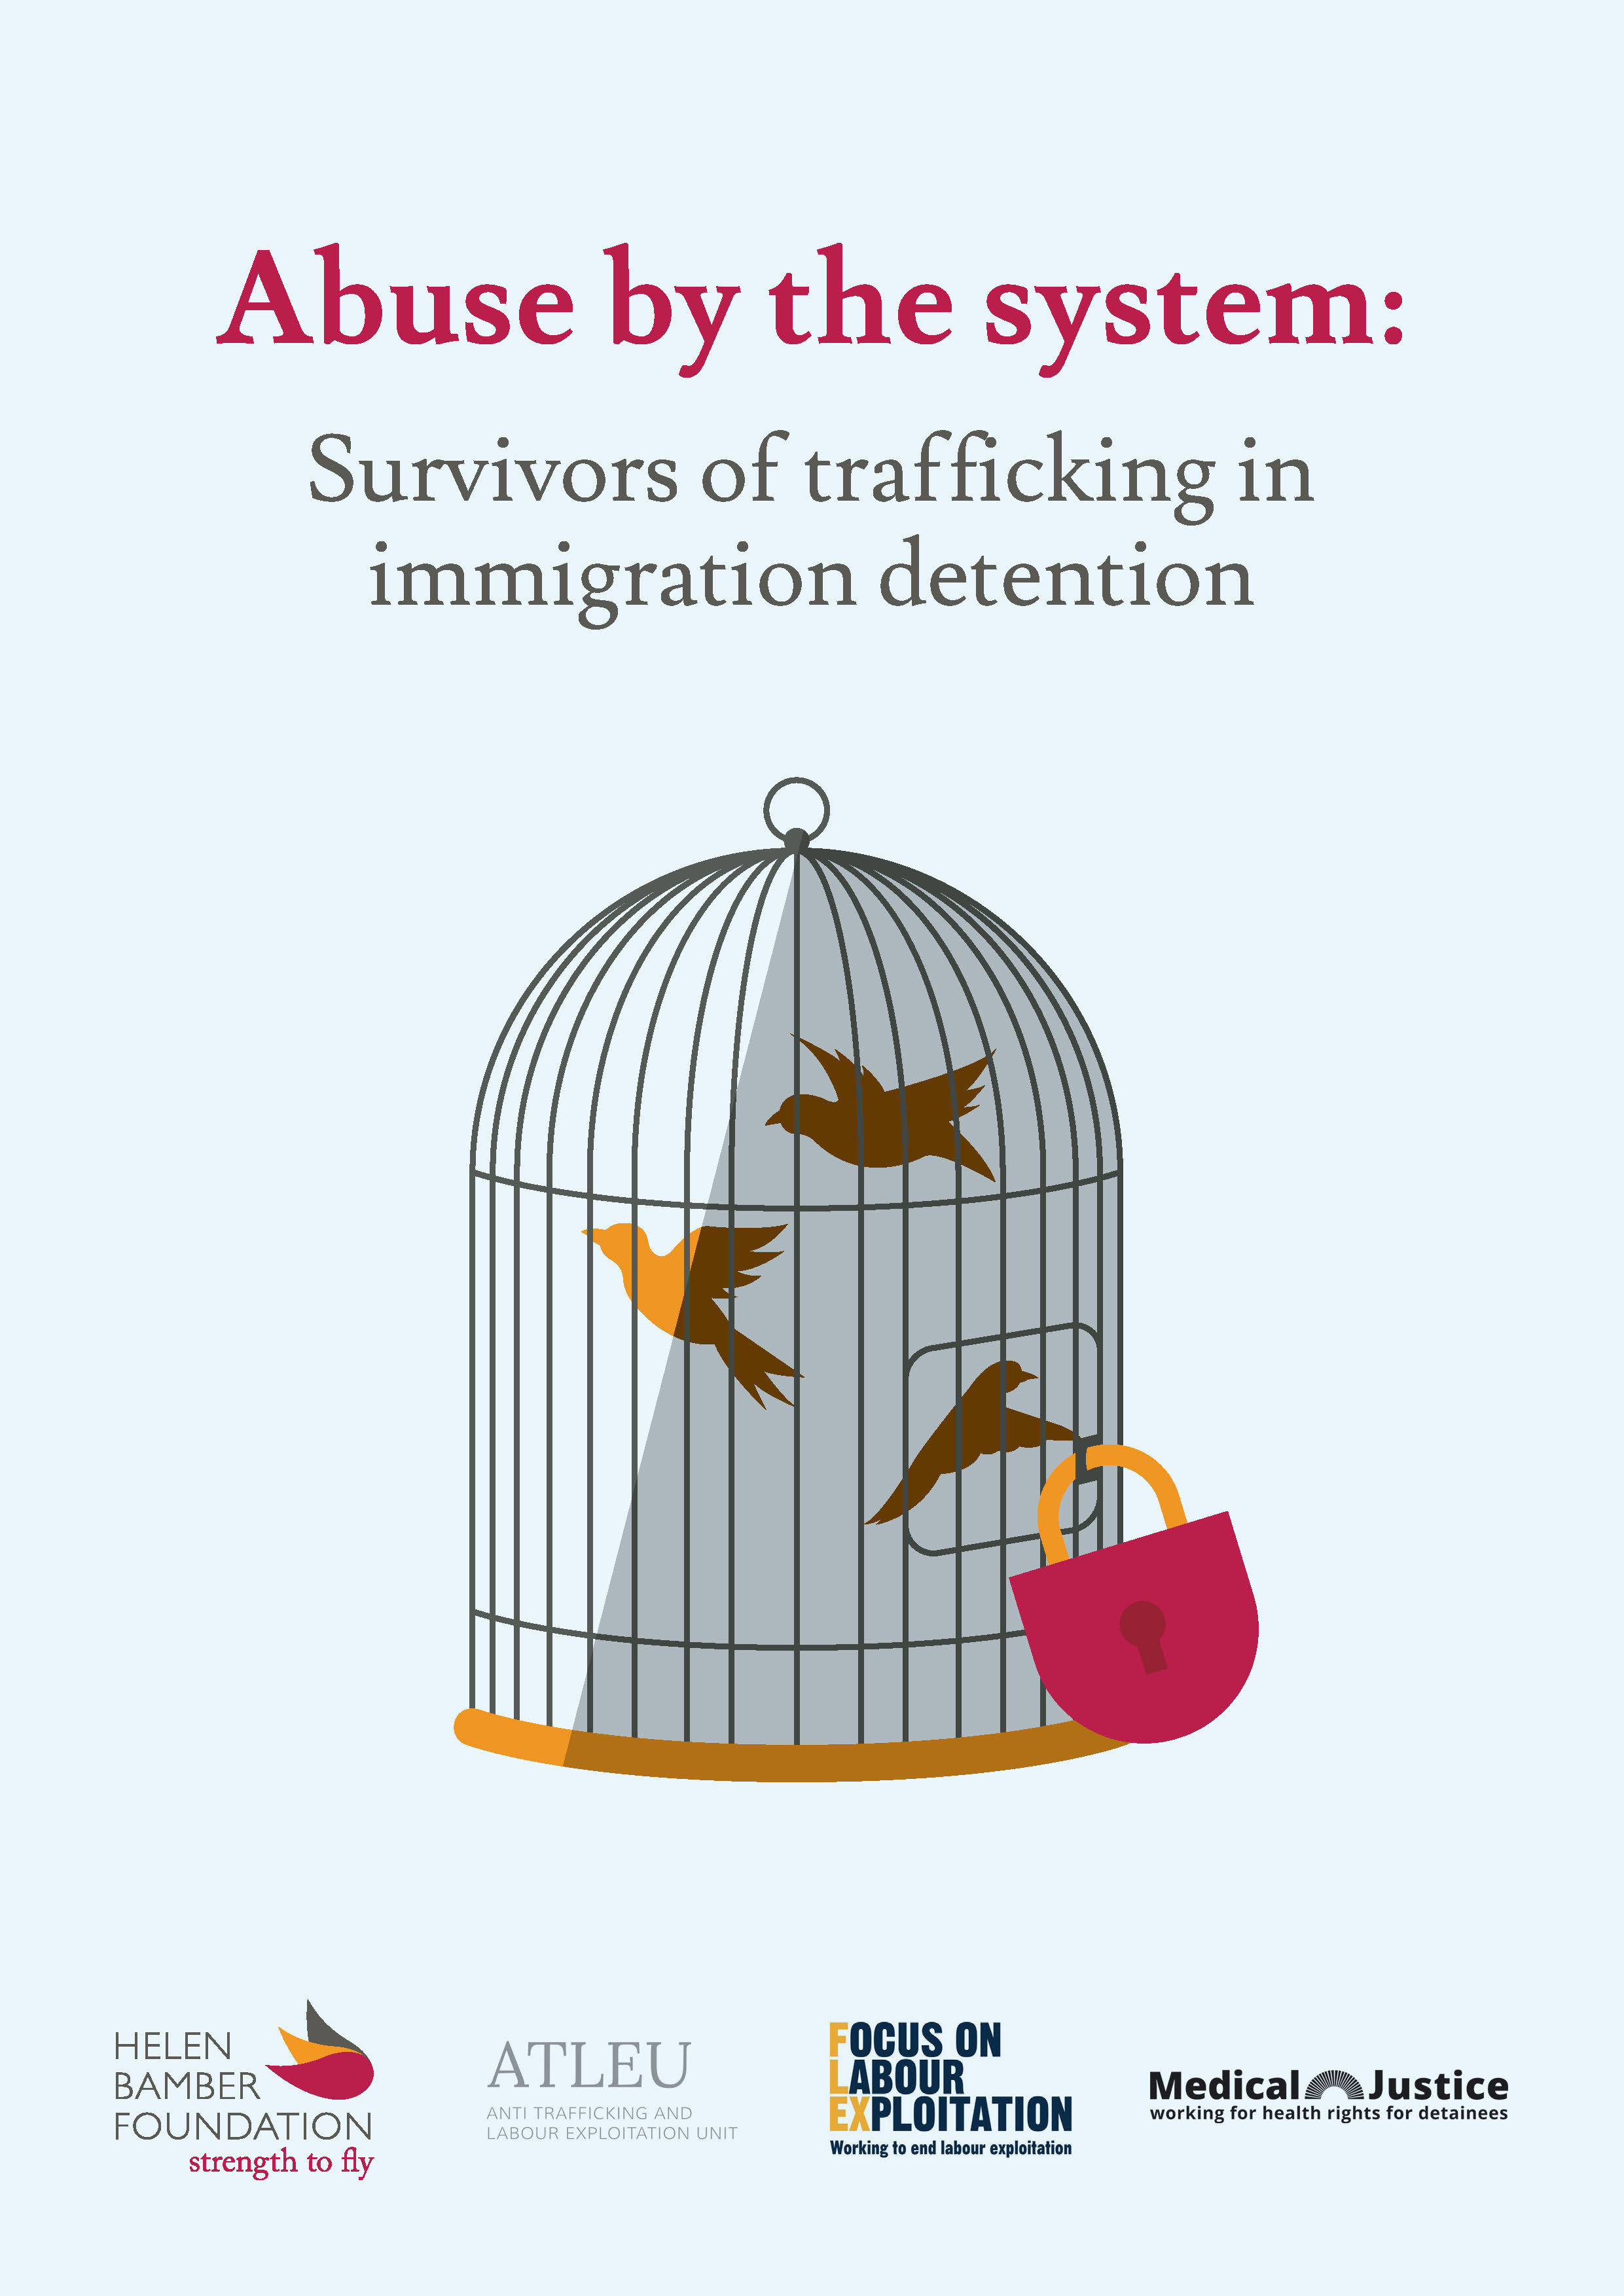 Abuse by the system: Survivors of trafficking in immigration detention